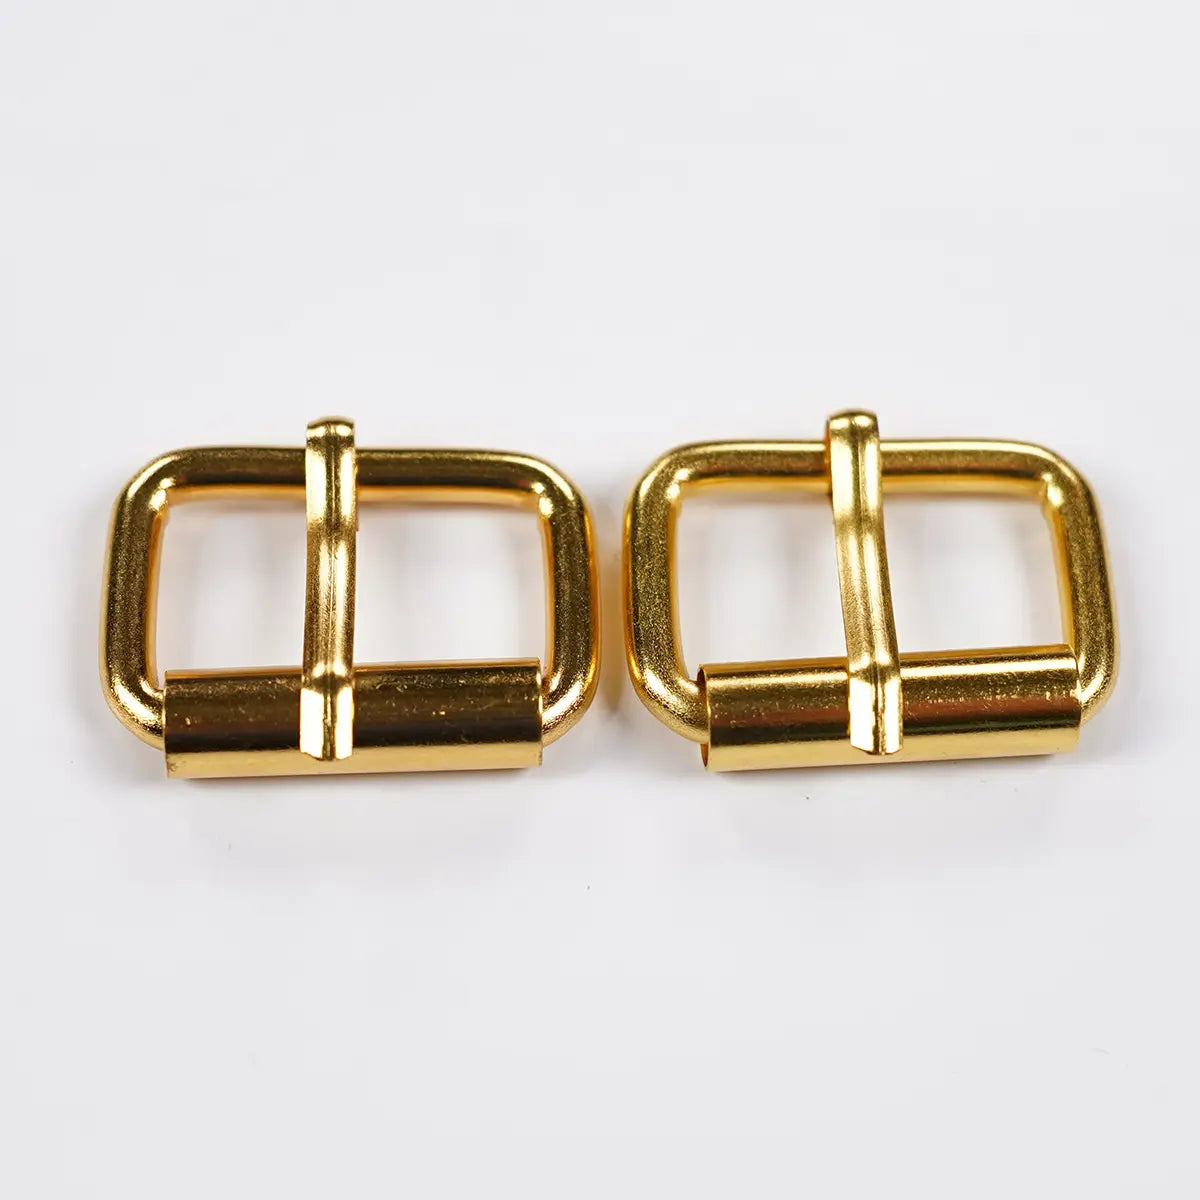 1" Roller Buckle Gold 2 Pack